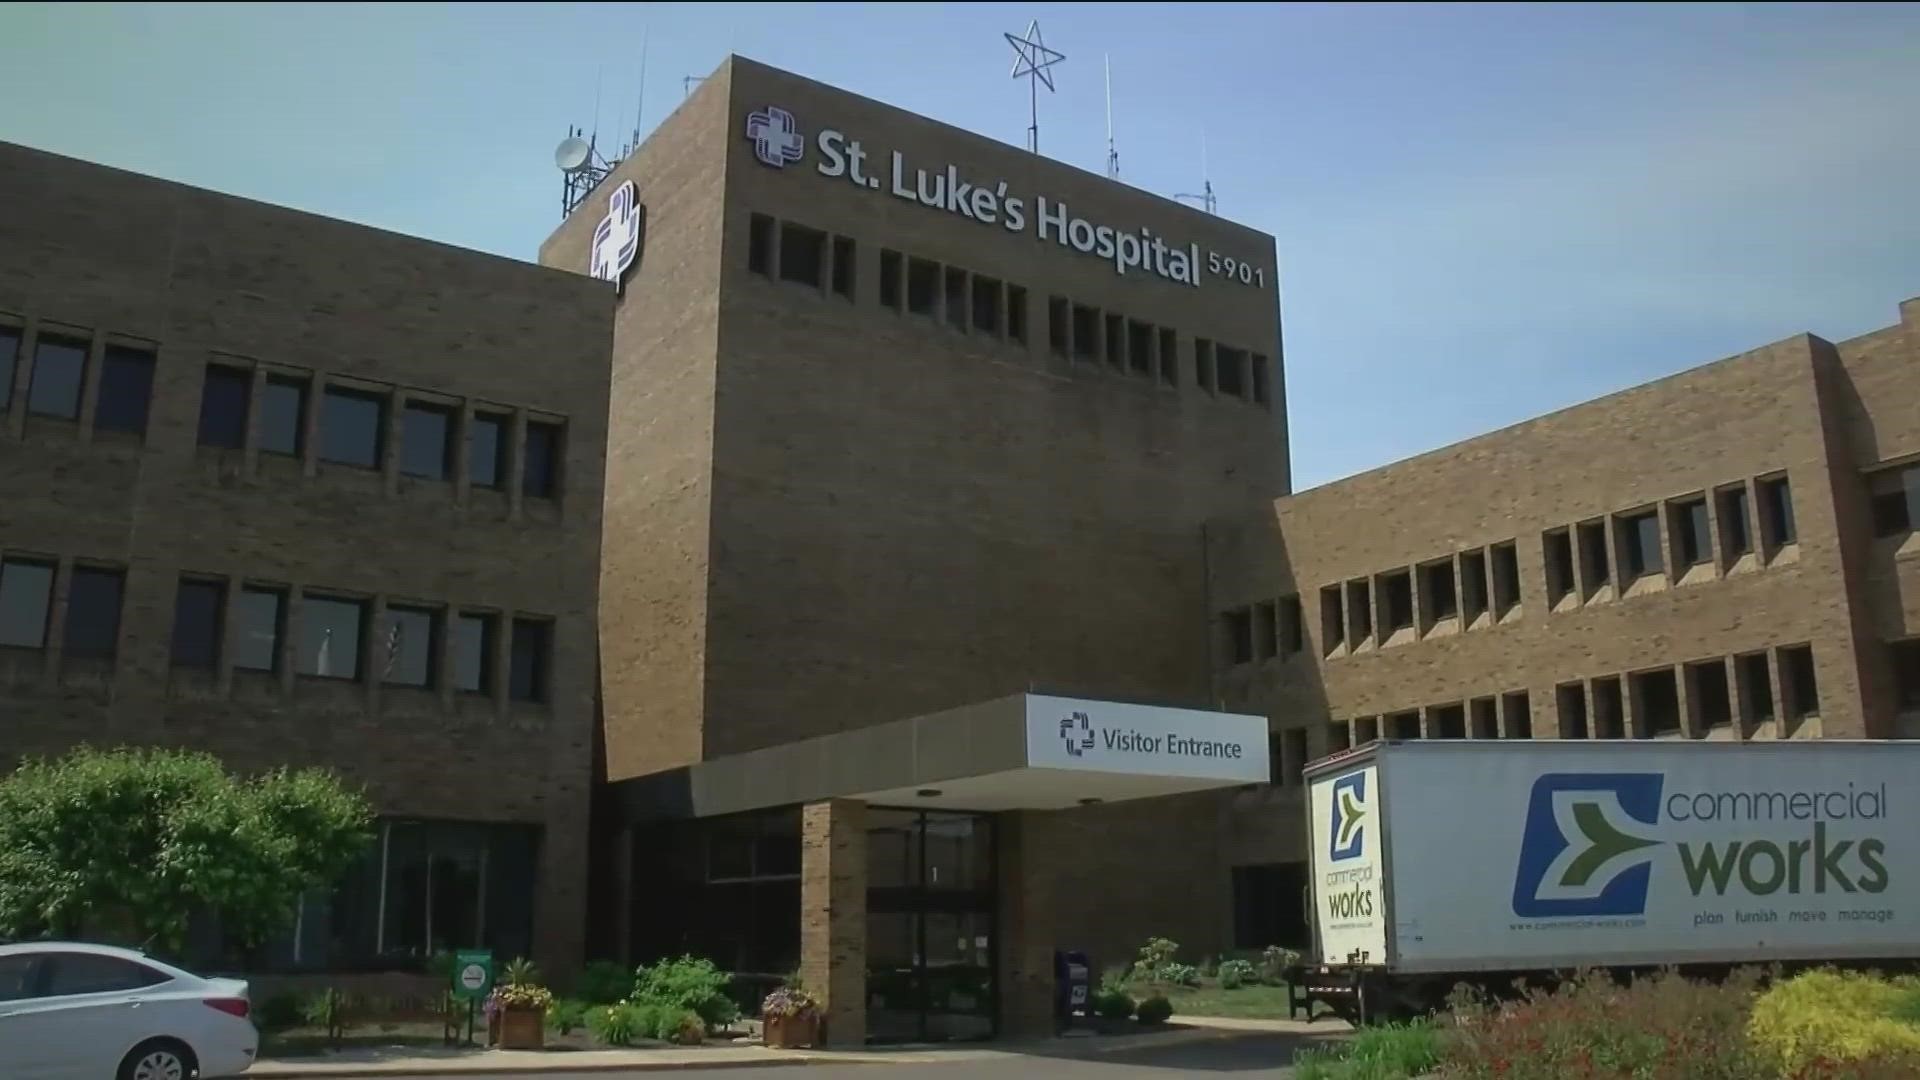 IRS tax forms reveal the difficult time McLaren has had since purchasing St. Luke's in getting the beleaguered hospital back in the black.